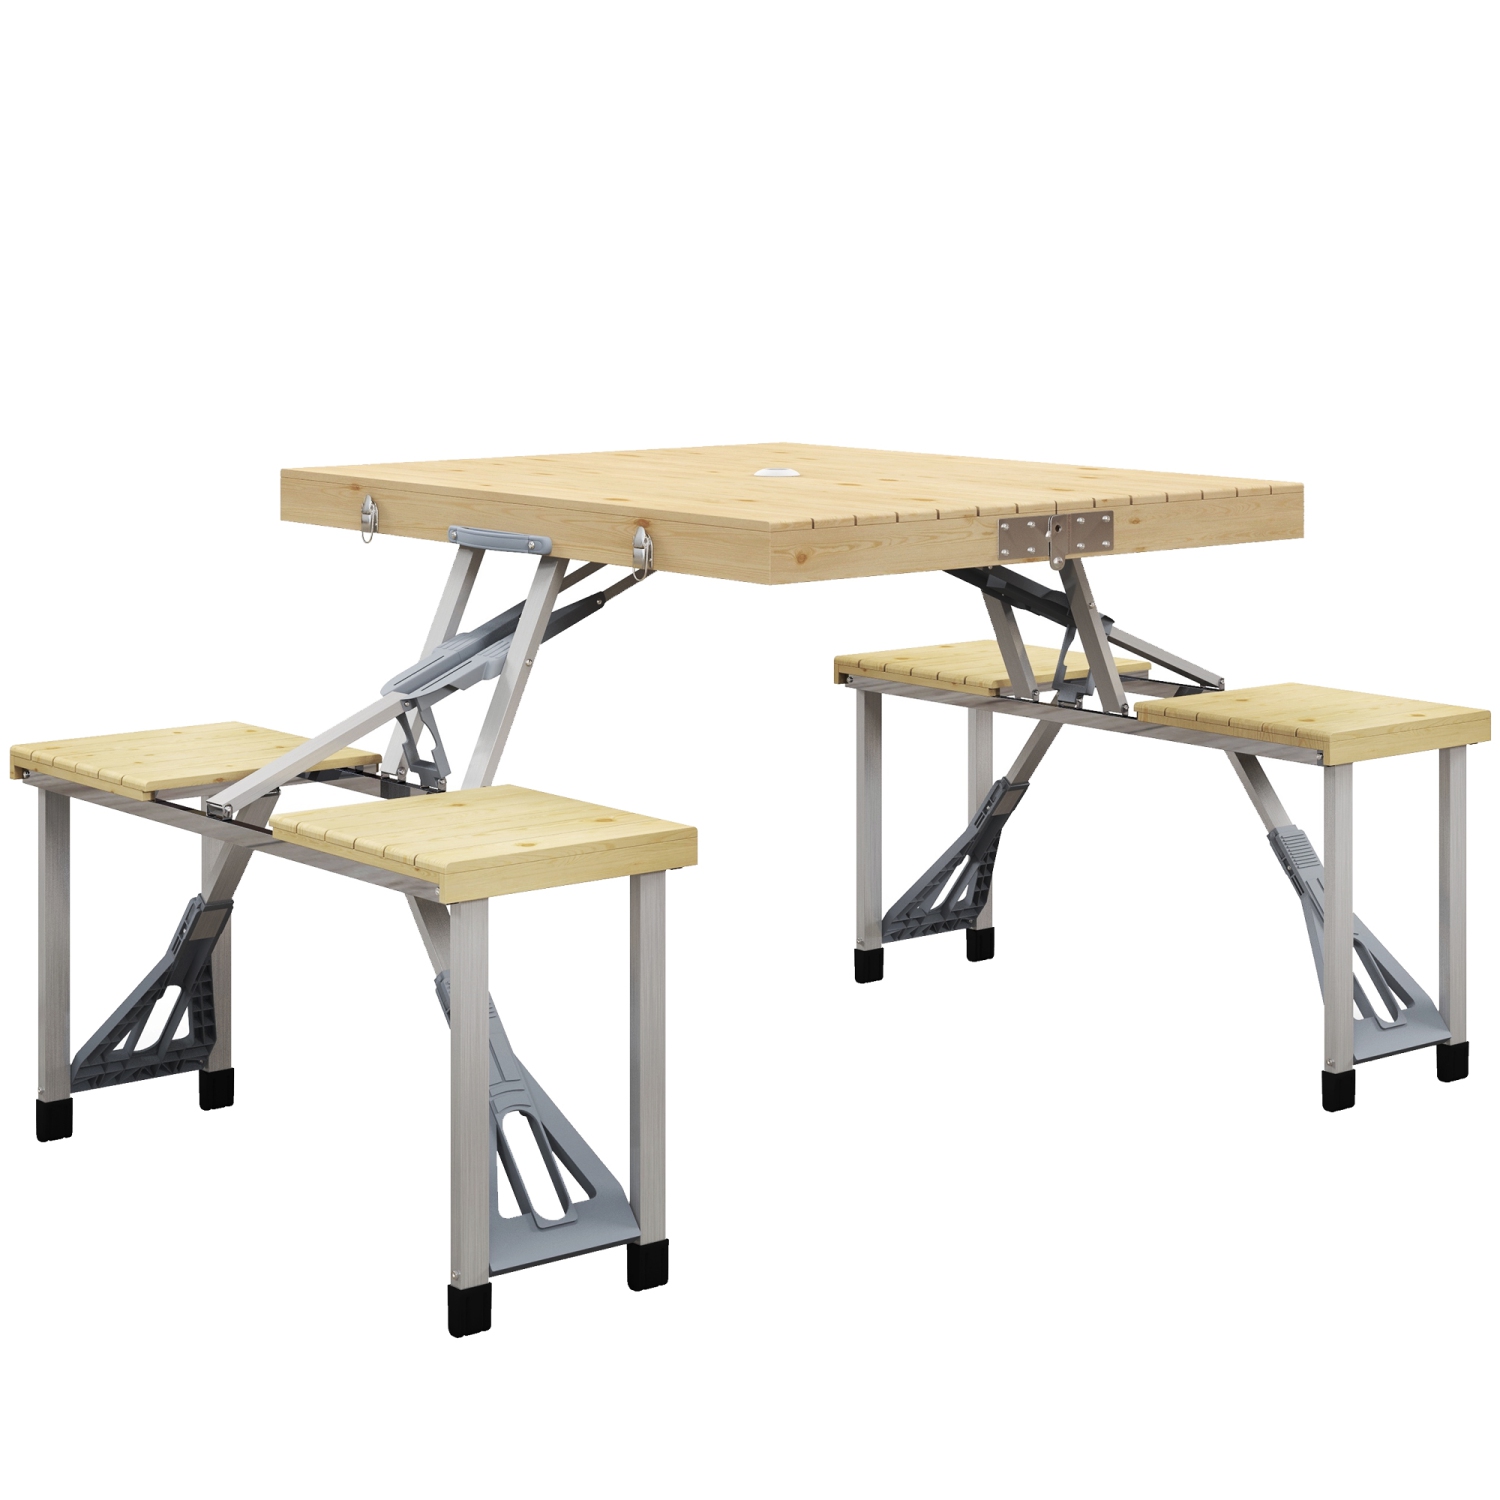 Outsunny Folding Picnic Table with Seats and Umbrella Hole